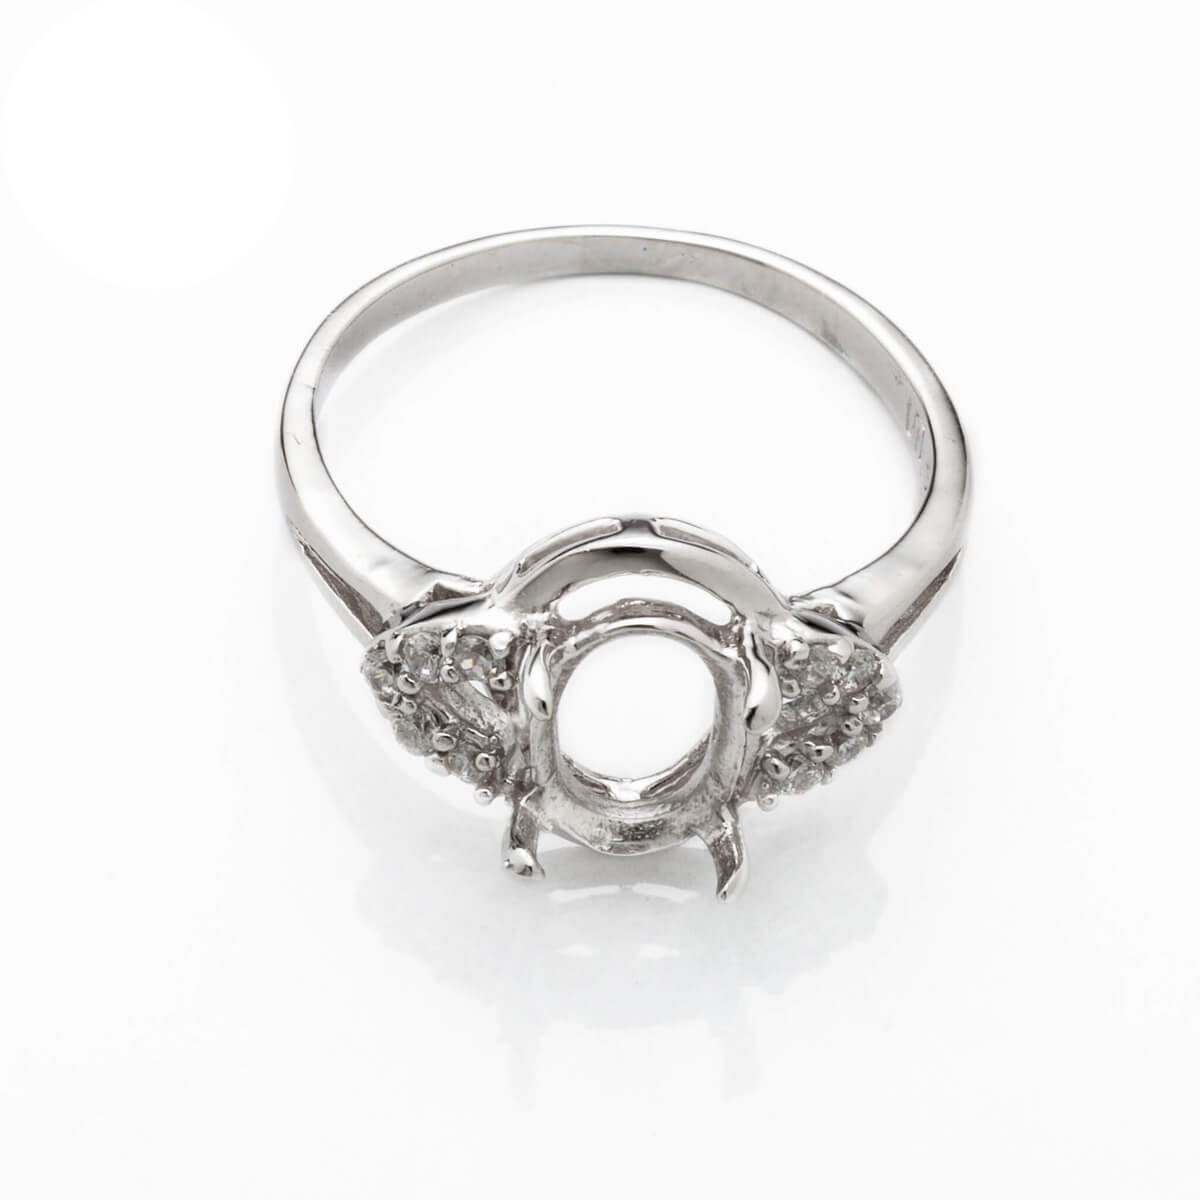 Ring with Oval Prongs Mounting and Cubic Zirconia Inlays in Sterling Silver 6x8mm